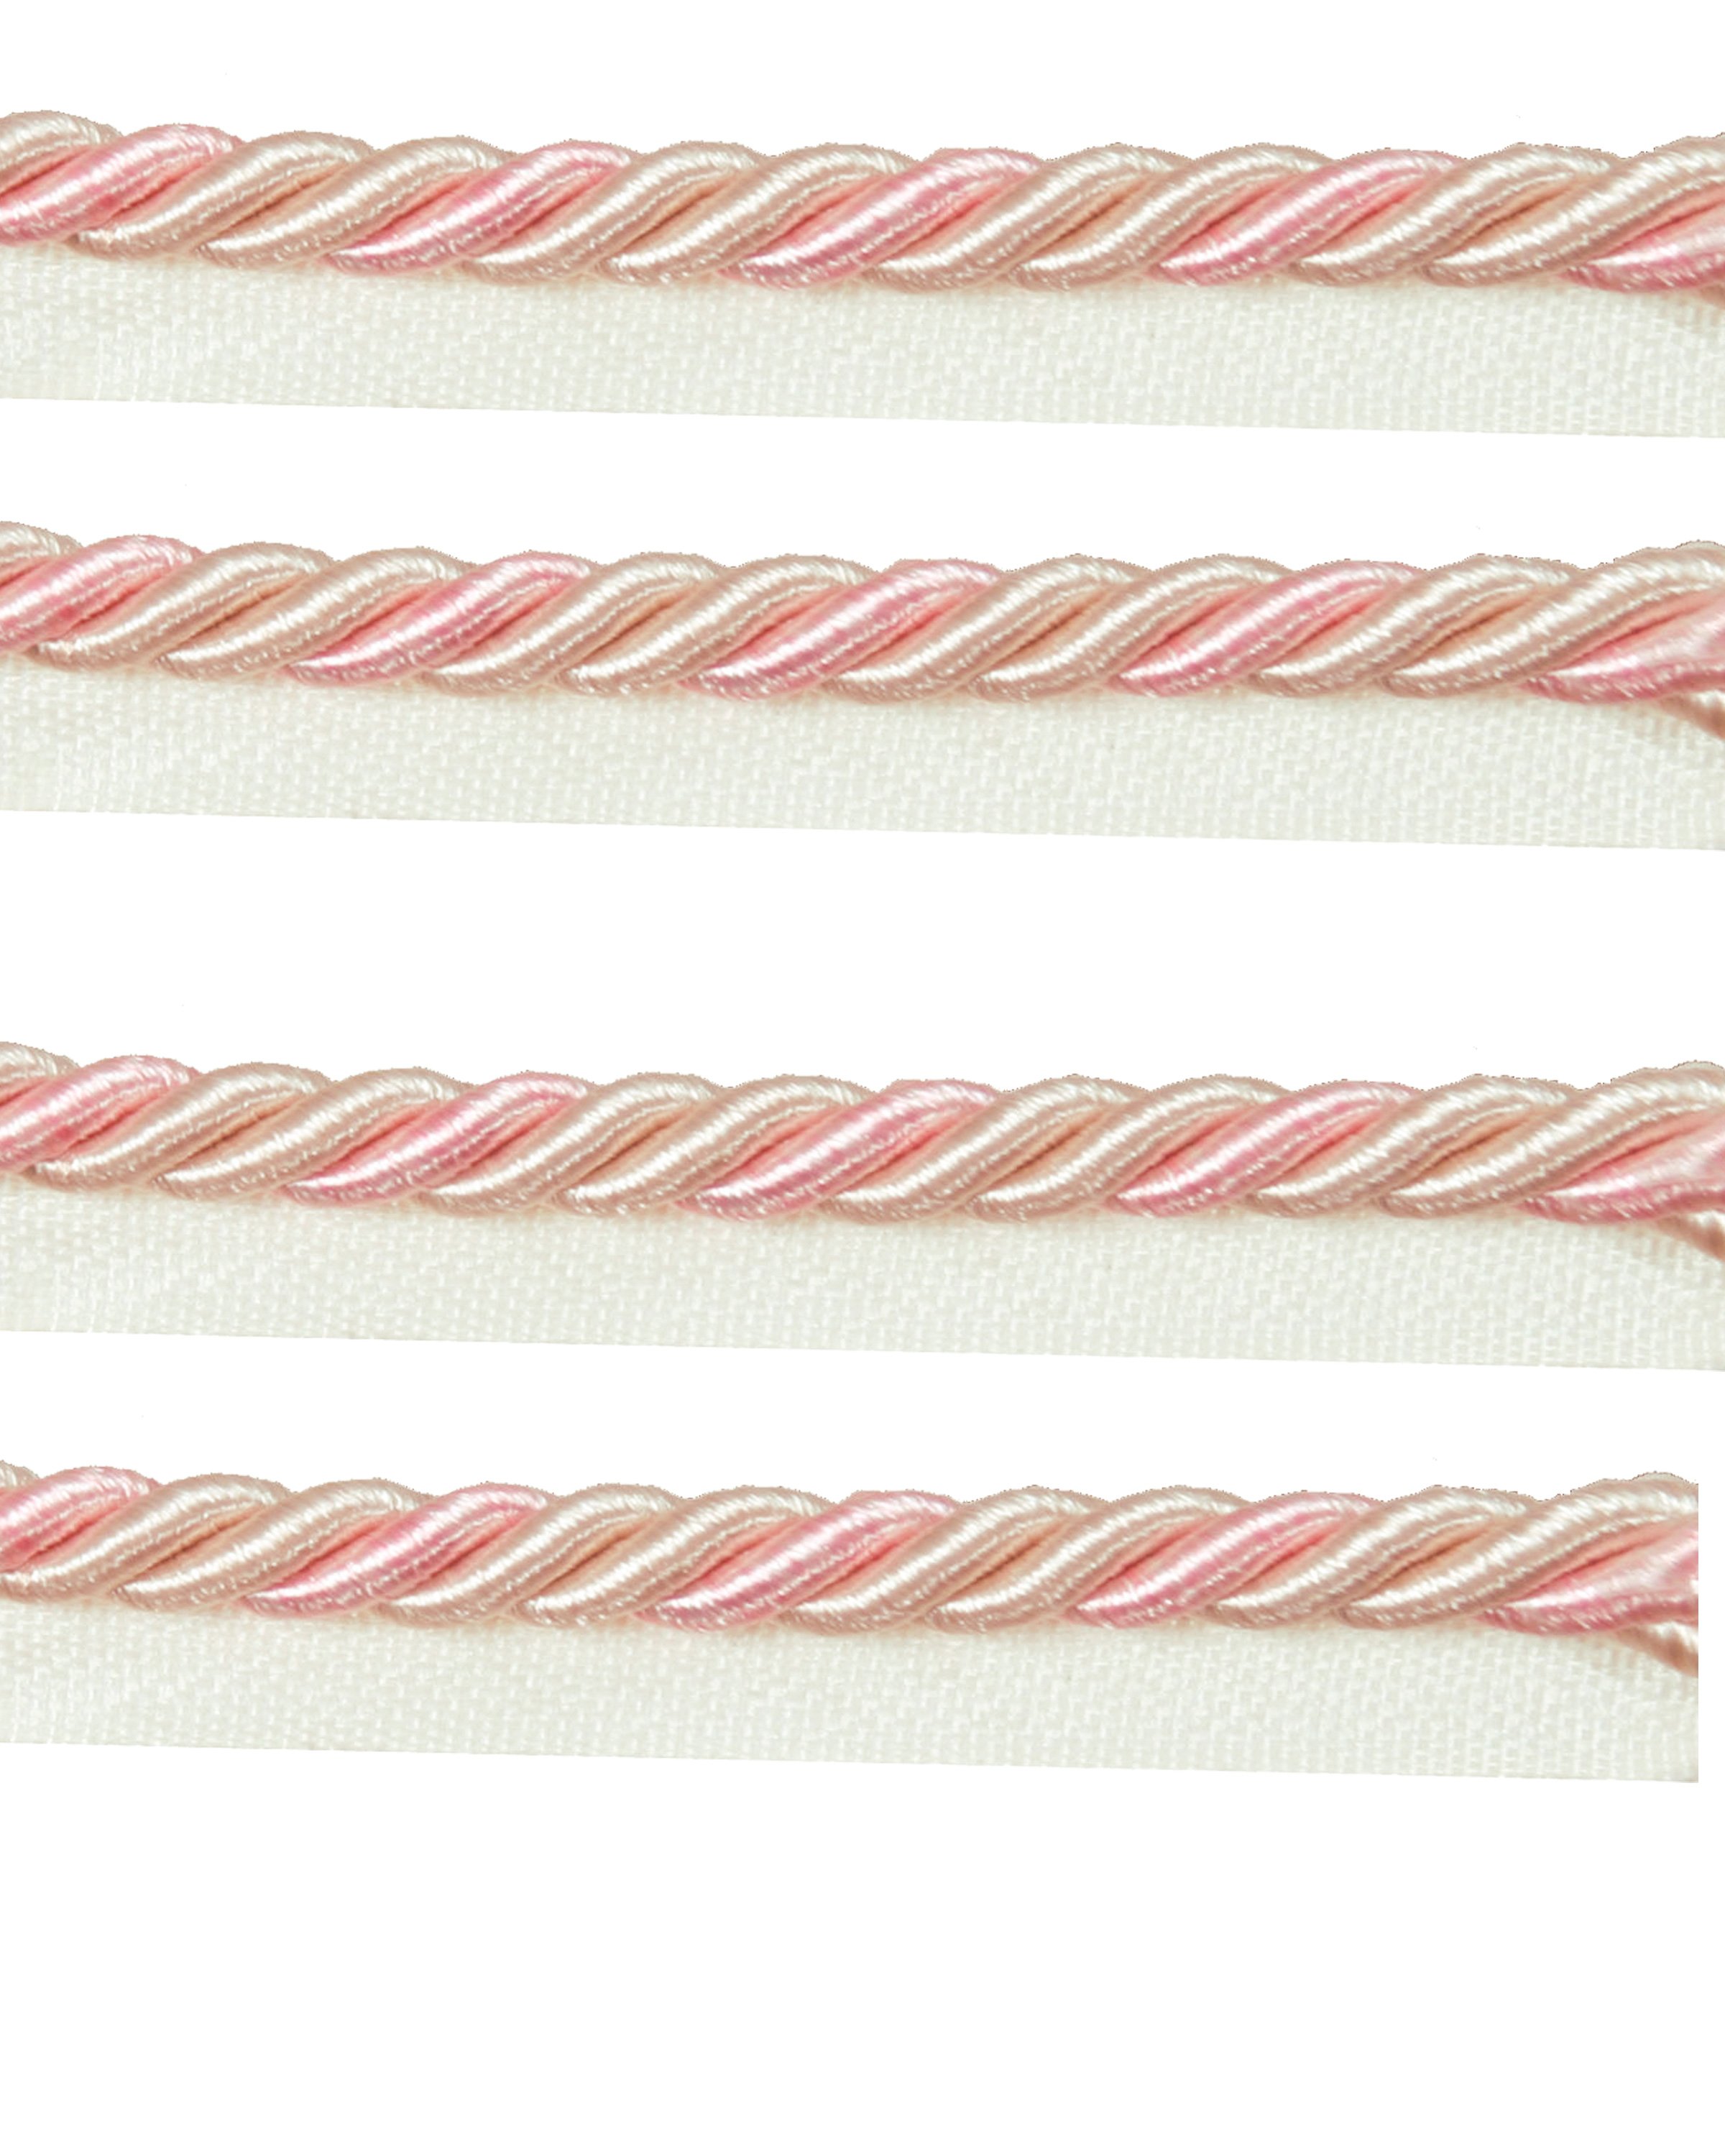 Piping Cord 8mm 2 Tone Twist on Tape - Pale Pink / Dusky Pink Price is for 5 metres 